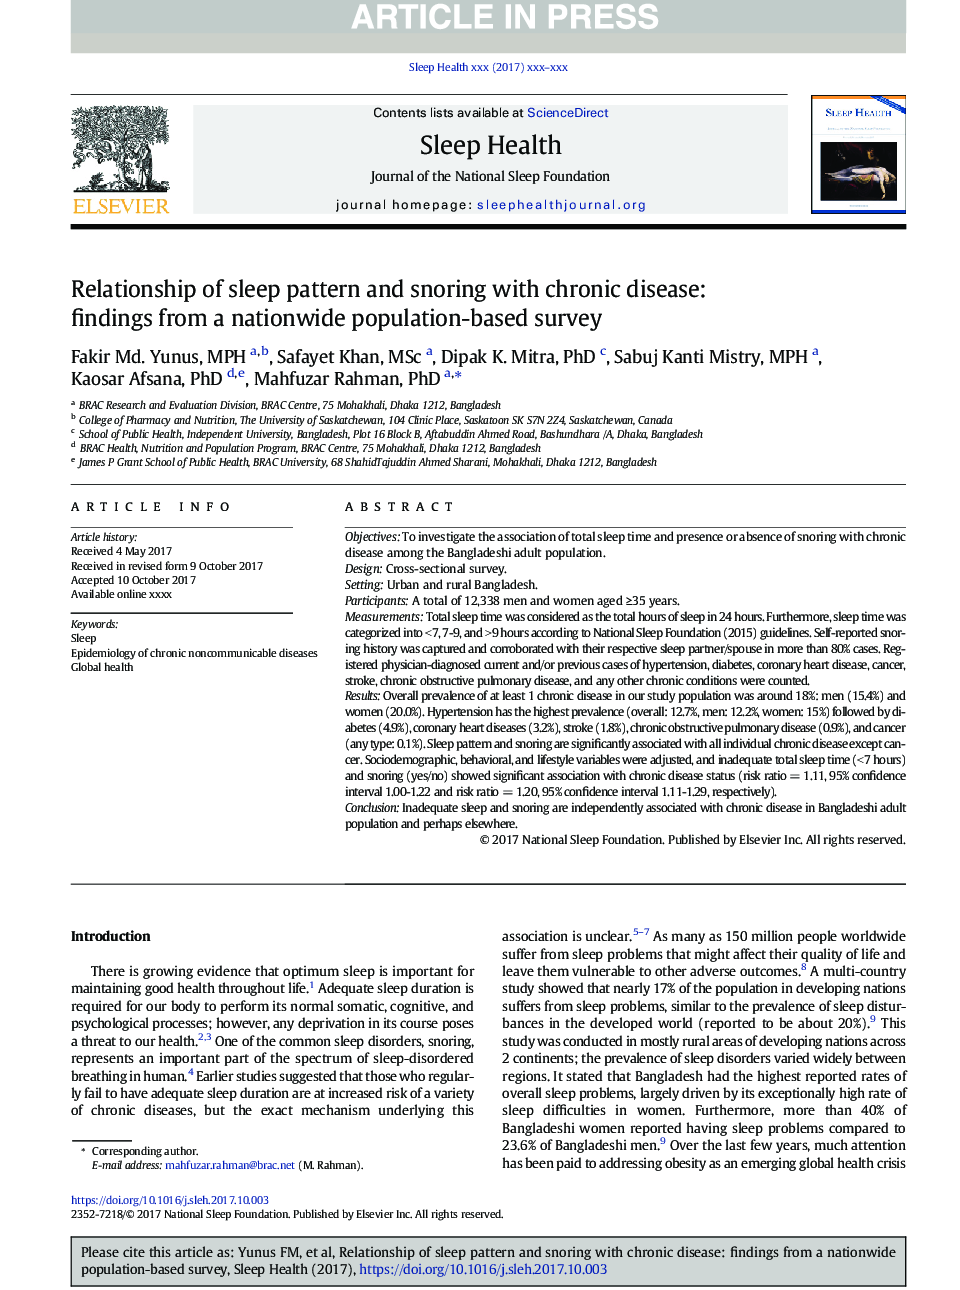 Relationship of sleep pattern and snoring with chronic disease: findings from a nationwide population-based survey